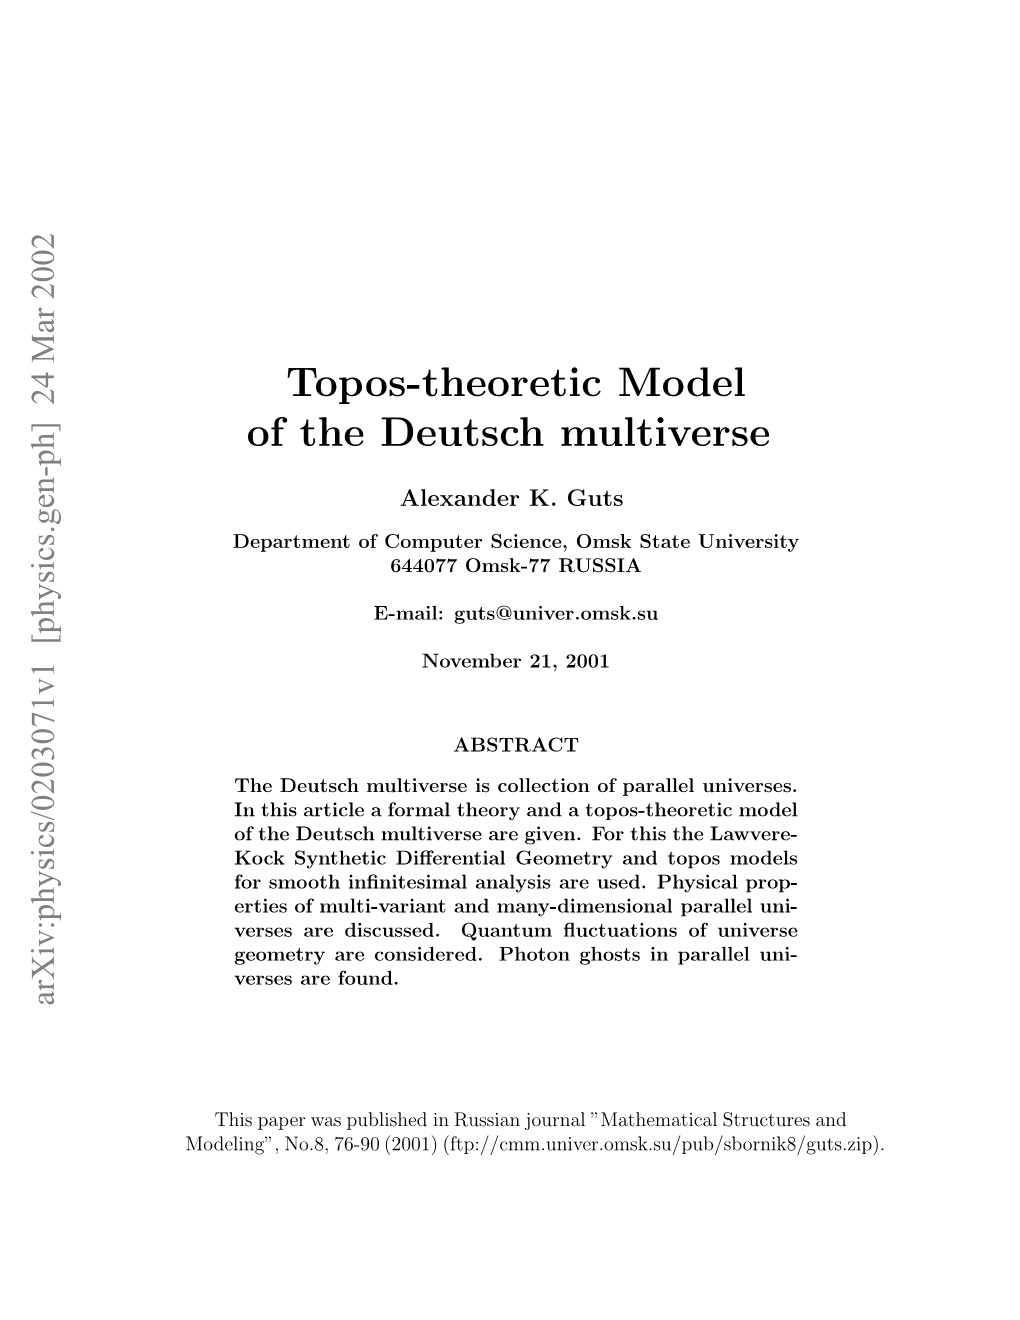 Topos-Theoretic Model of the Deutsch Multiverse Are Given